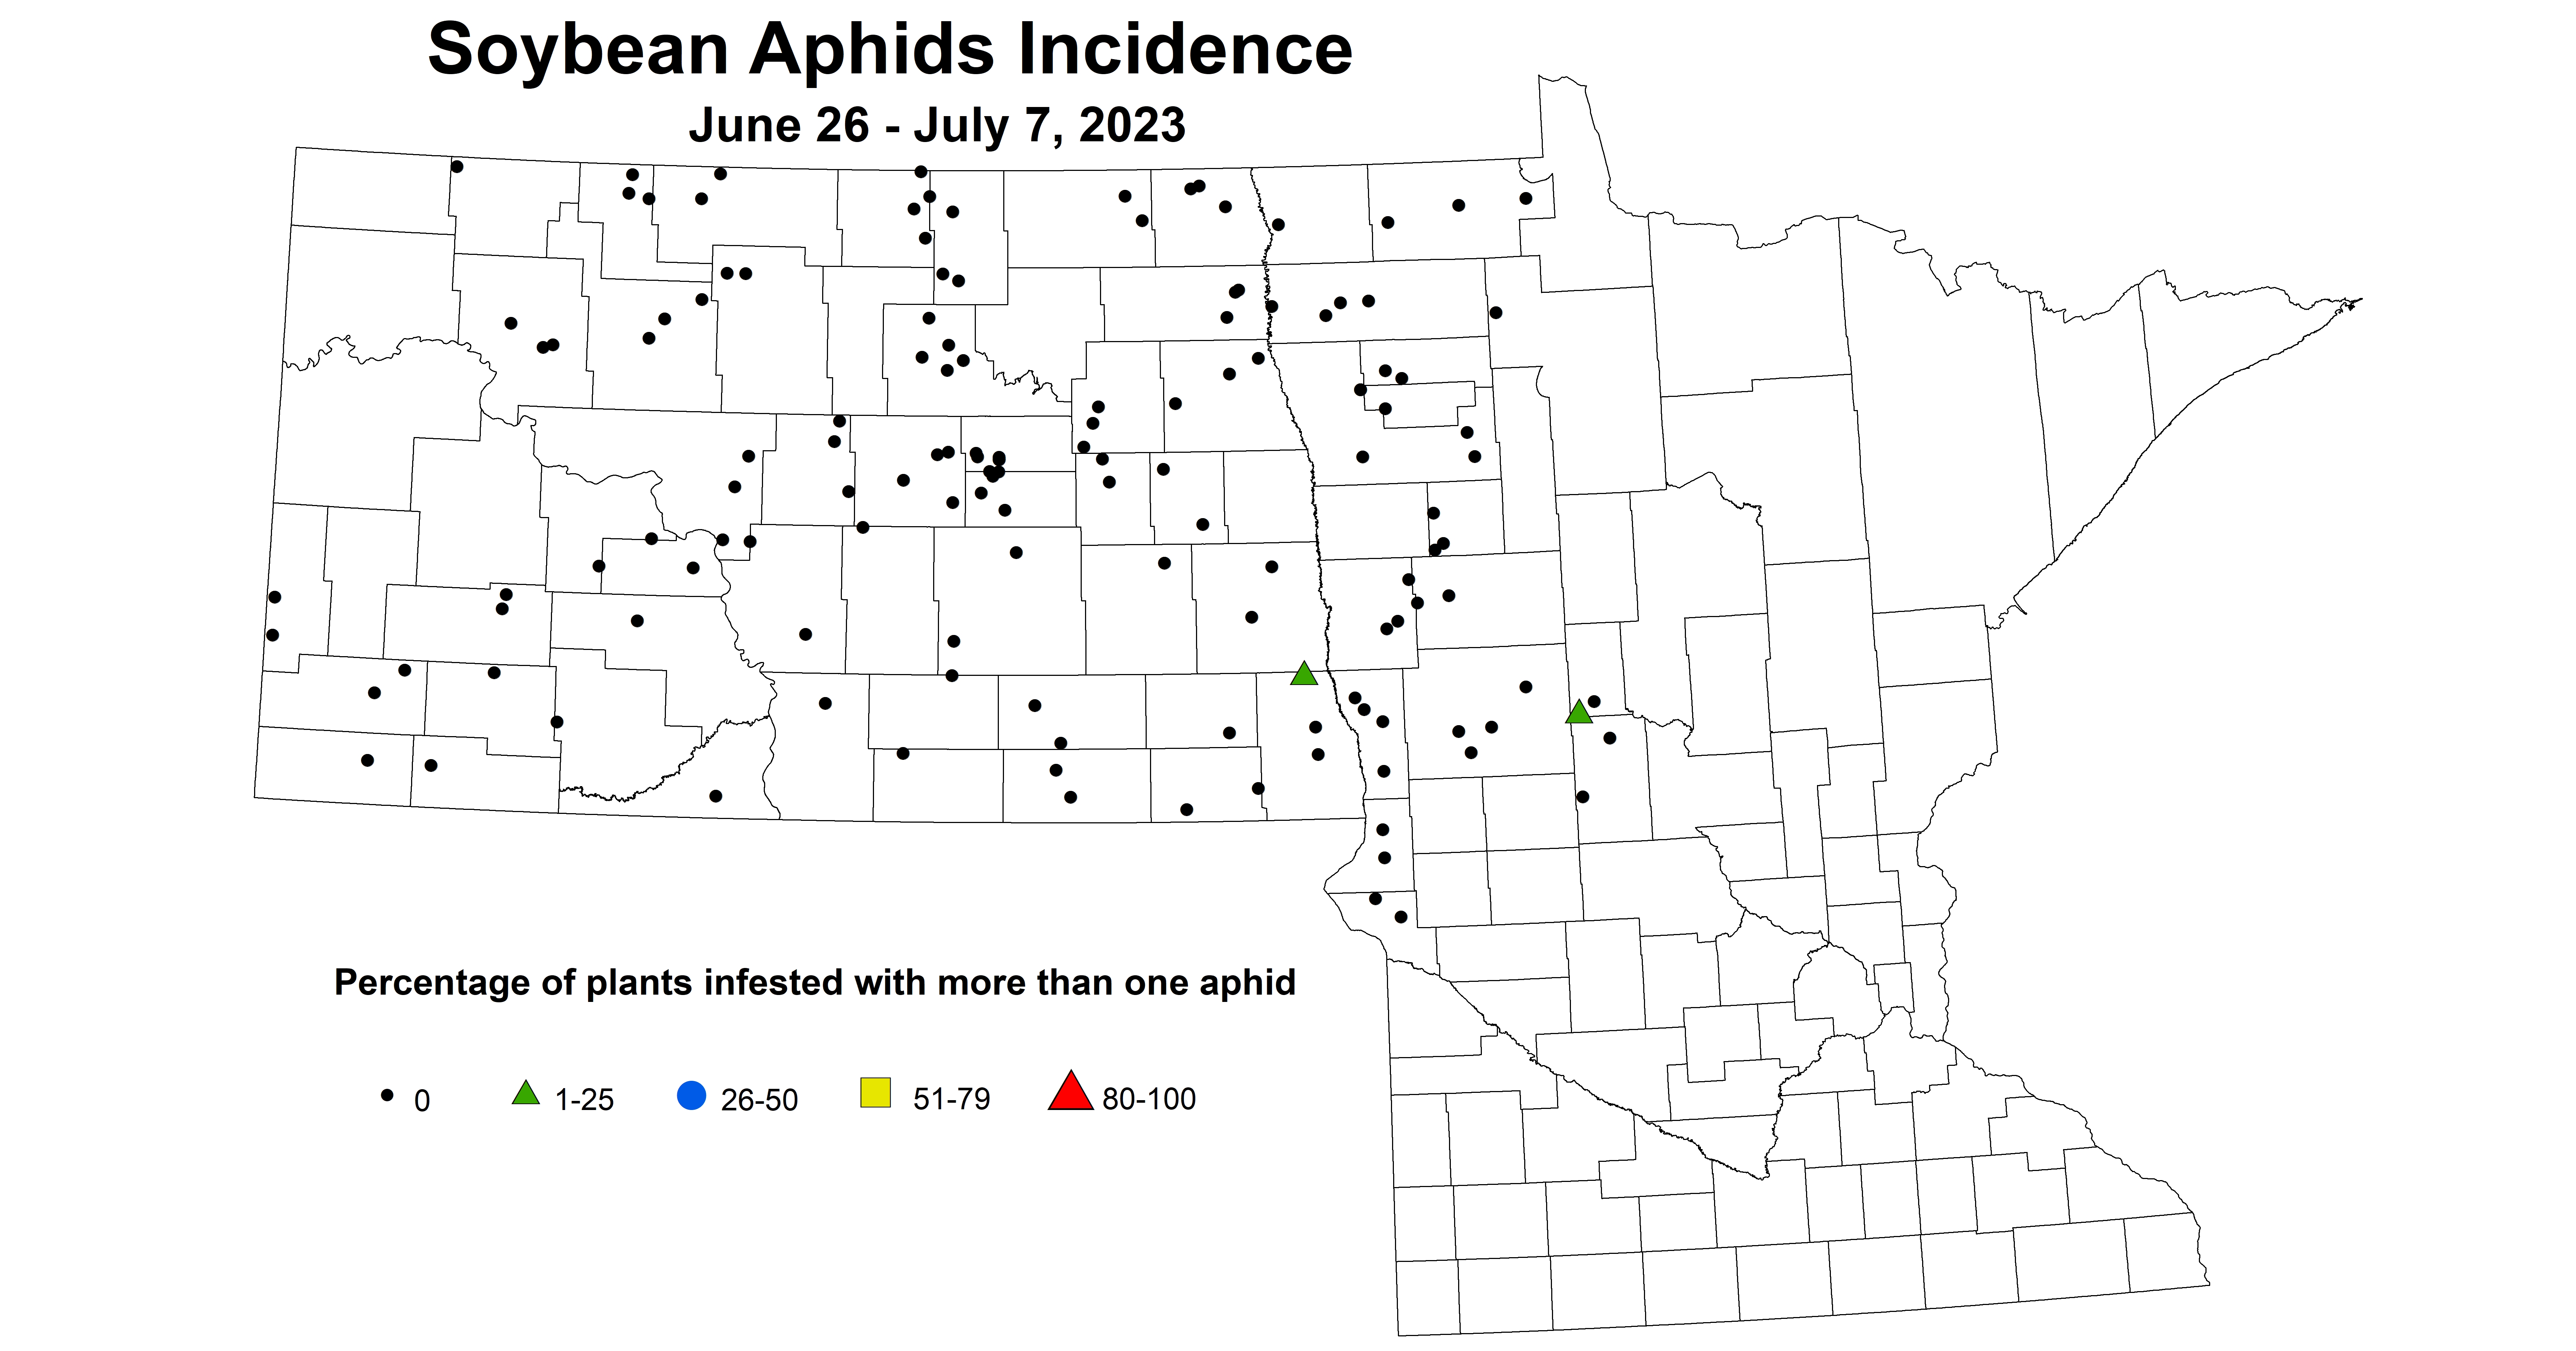 soybean aphid incidence June 26 - July 7 2023